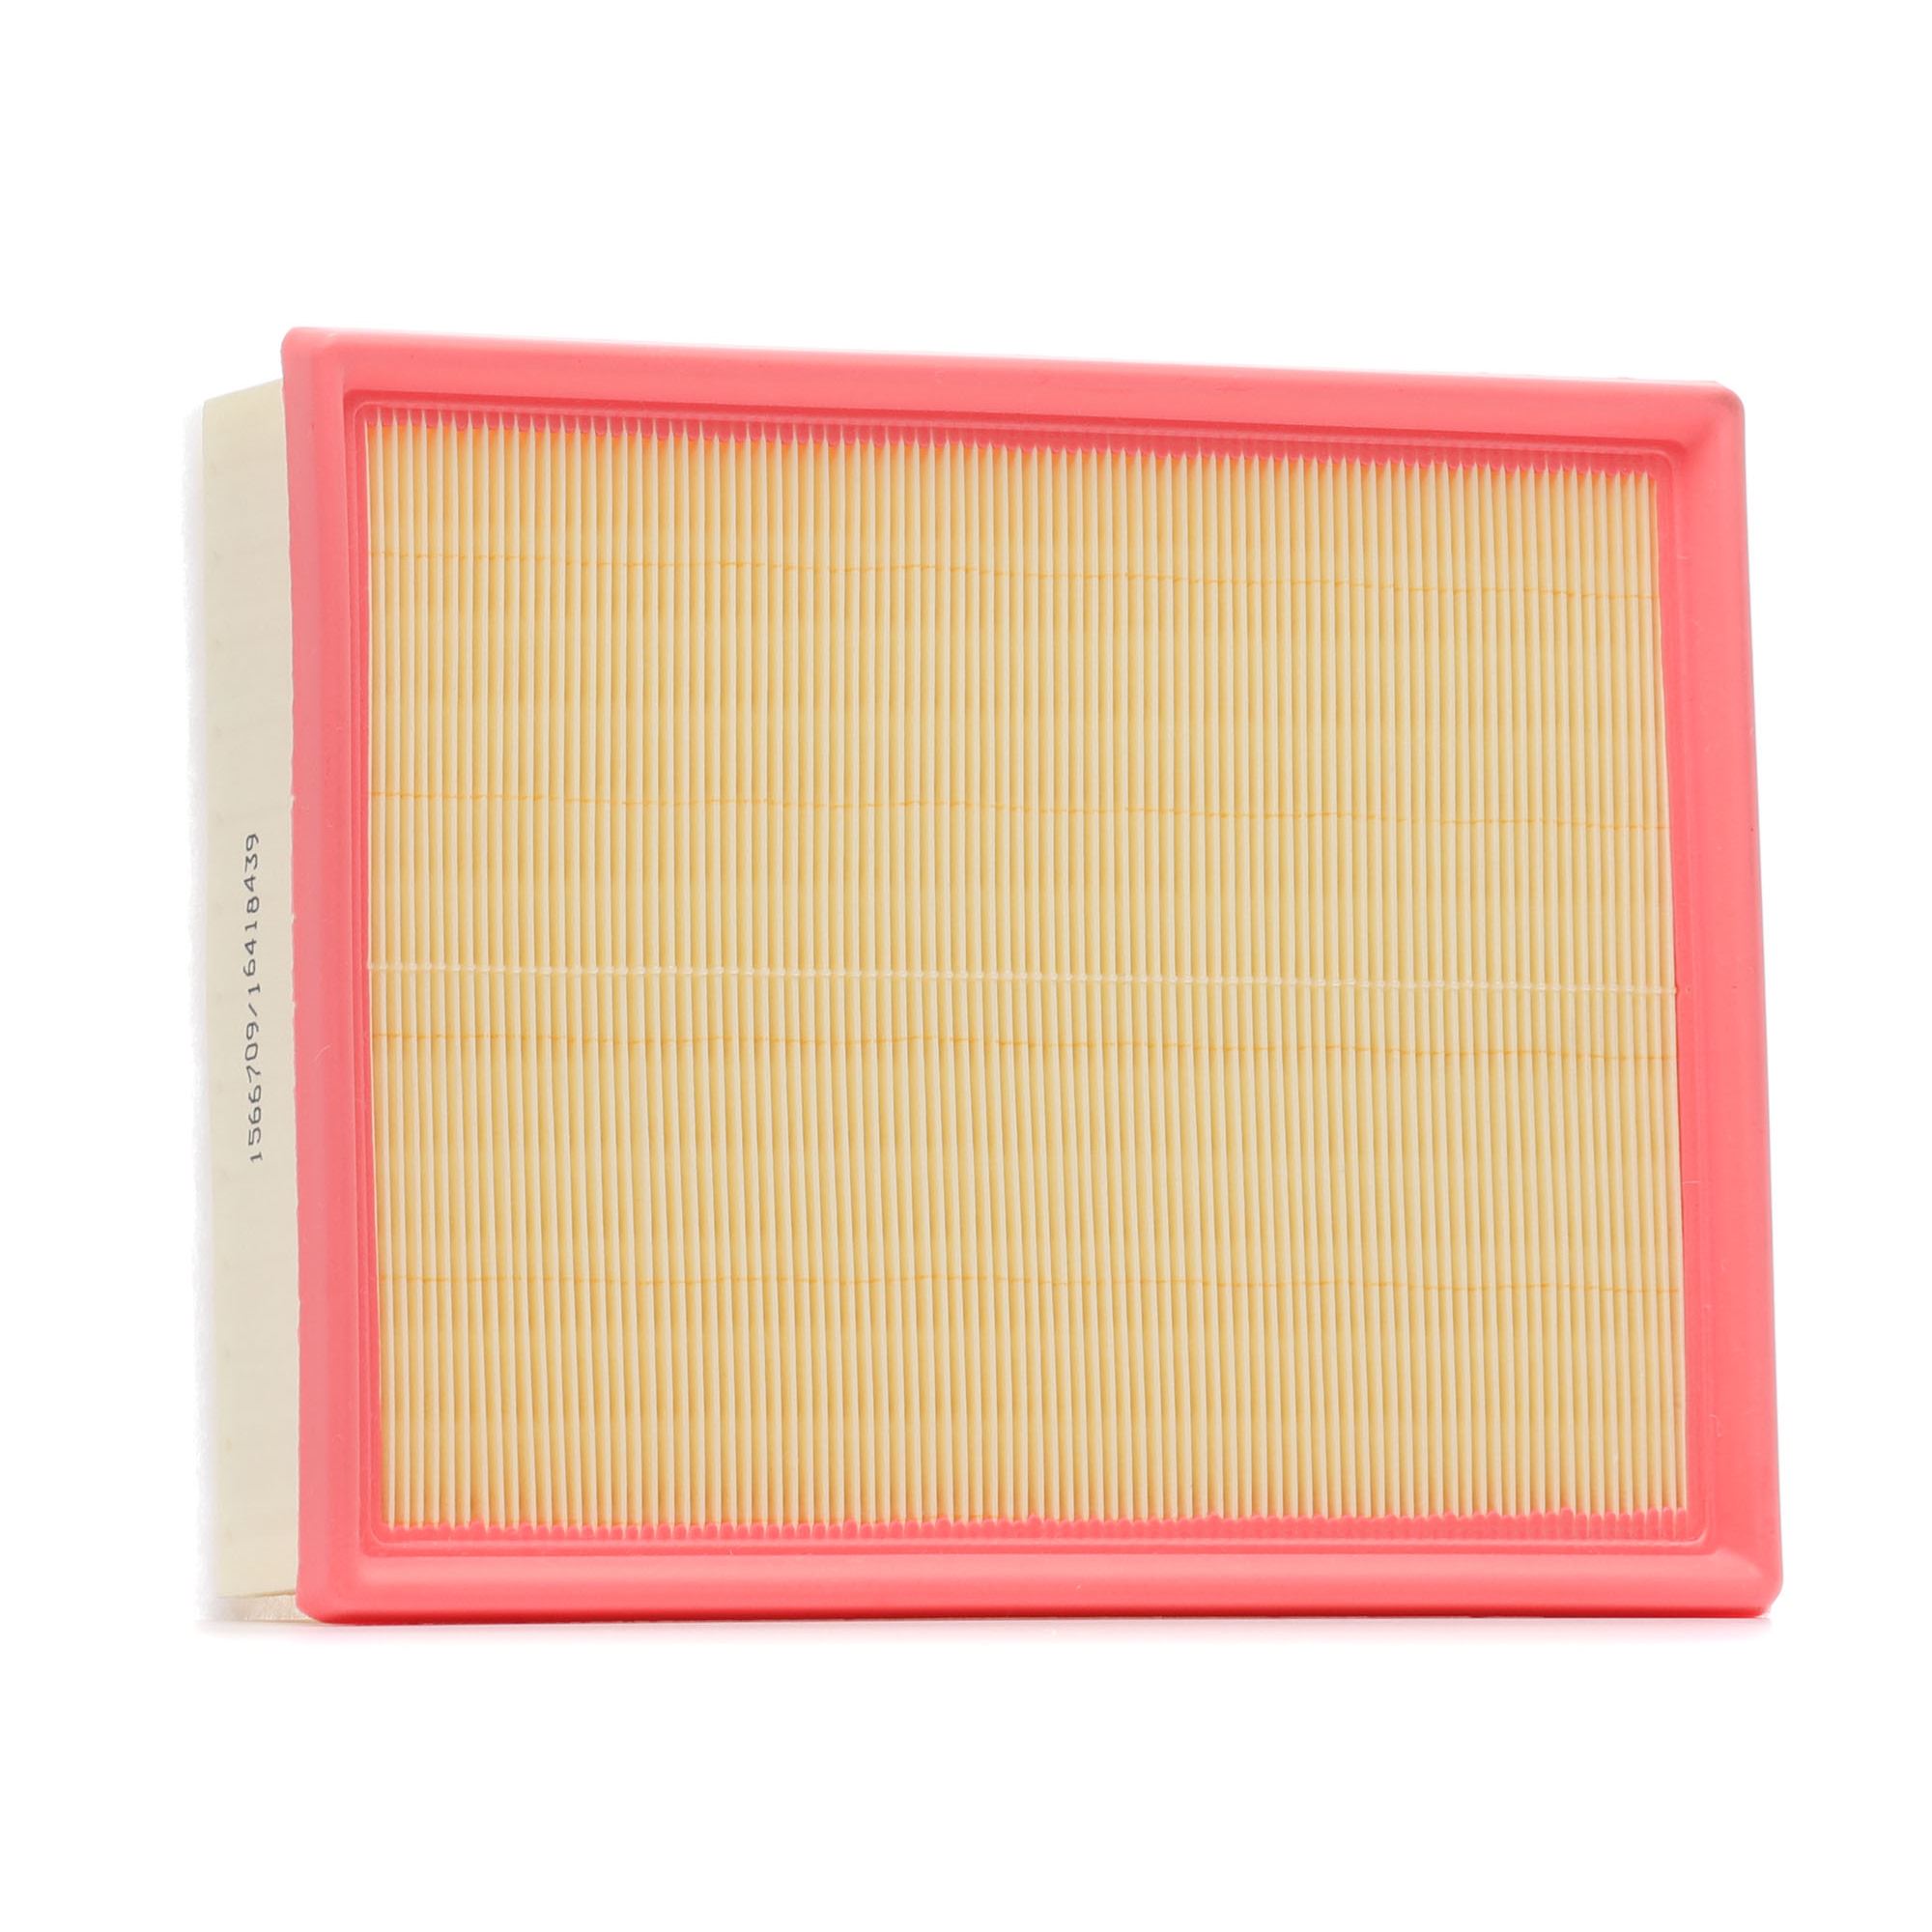 RIDEX 8A1640 Air filter 68mm, 218mm, 276mm, Filter Insert, Air Recirculation Filter, for dusty operating conditions, with pre-filter